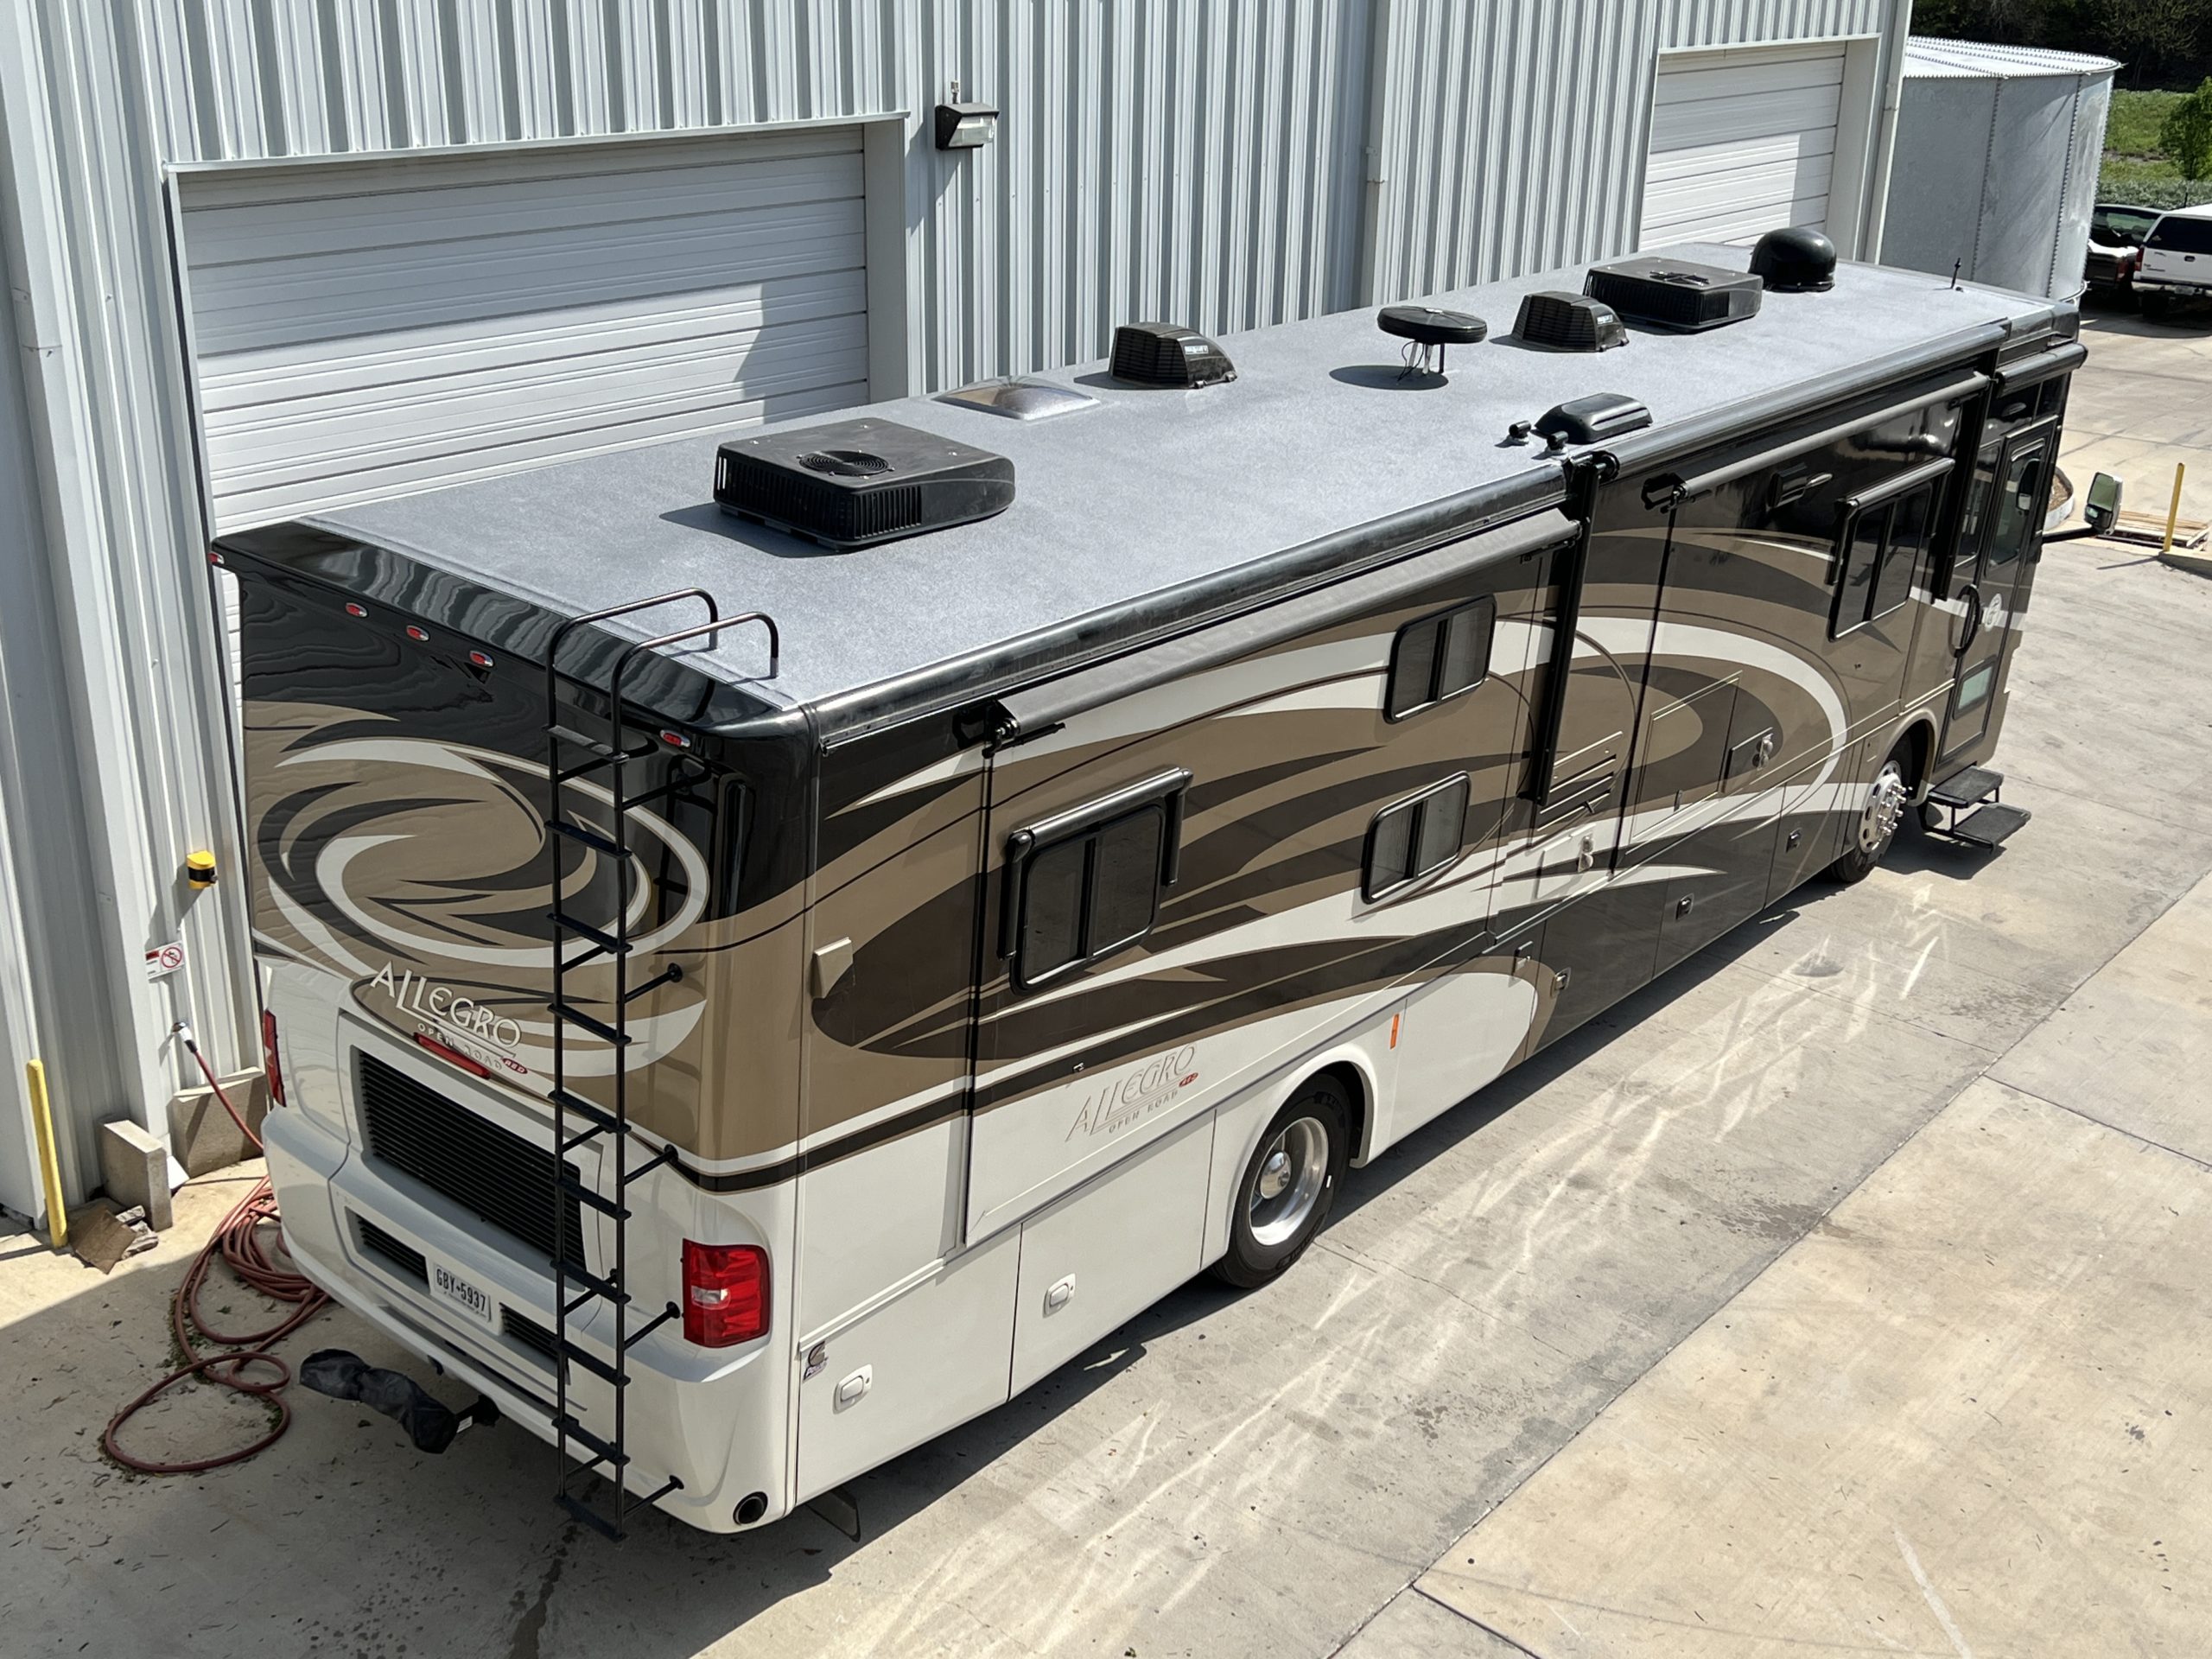 rv motorcoach with new rv roof liner from elite rv